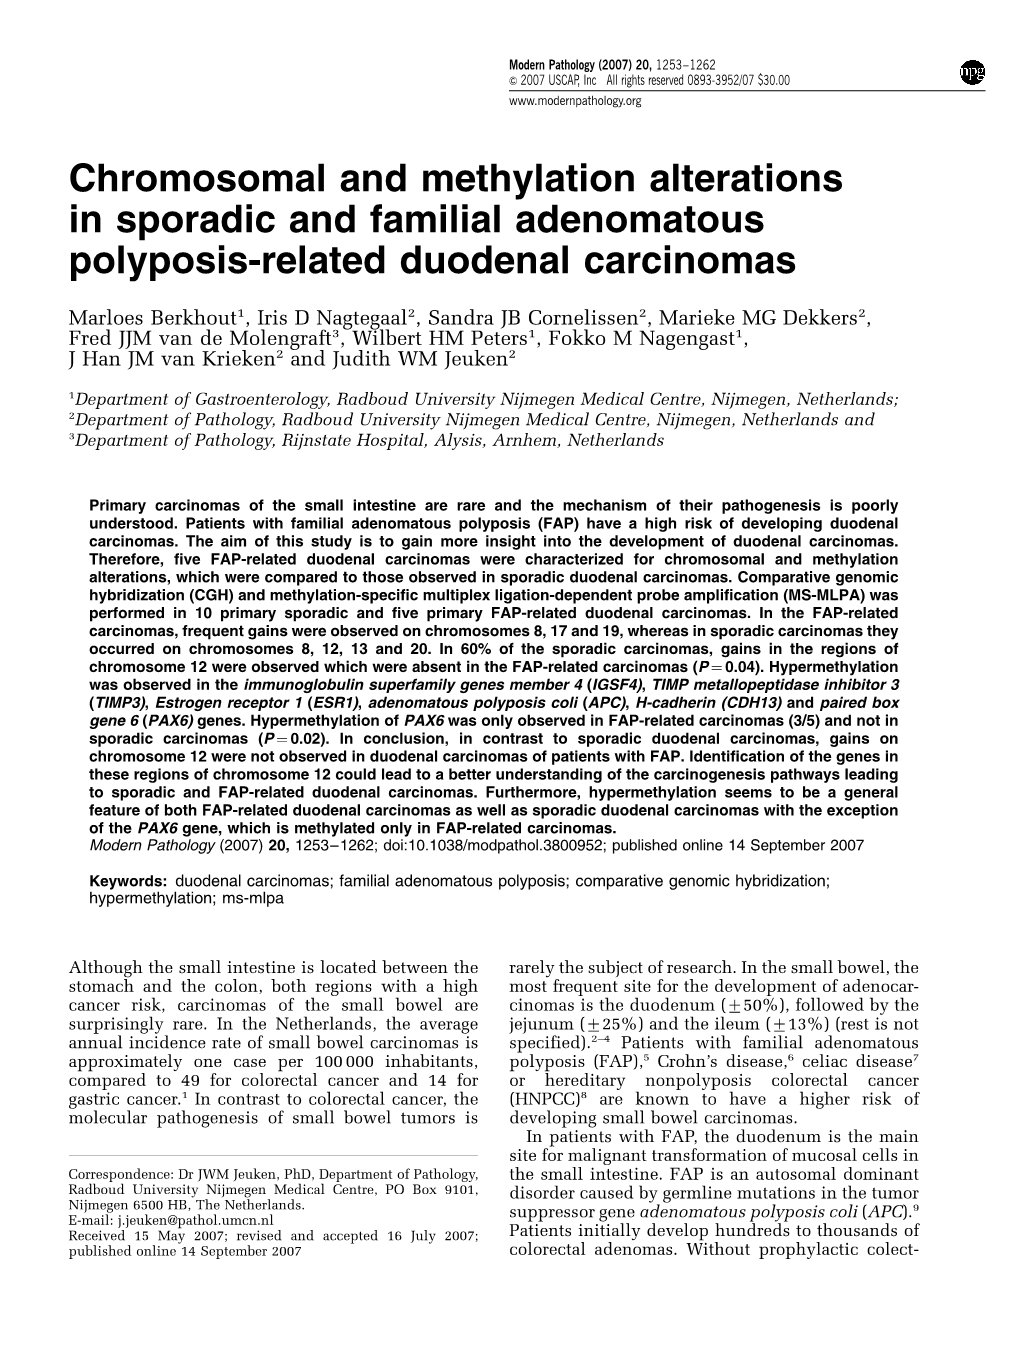 Chromosomal and Methylation Alterations in Sporadic and Familial Adenomatous Polyposis-Related Duodenal Carcinomas